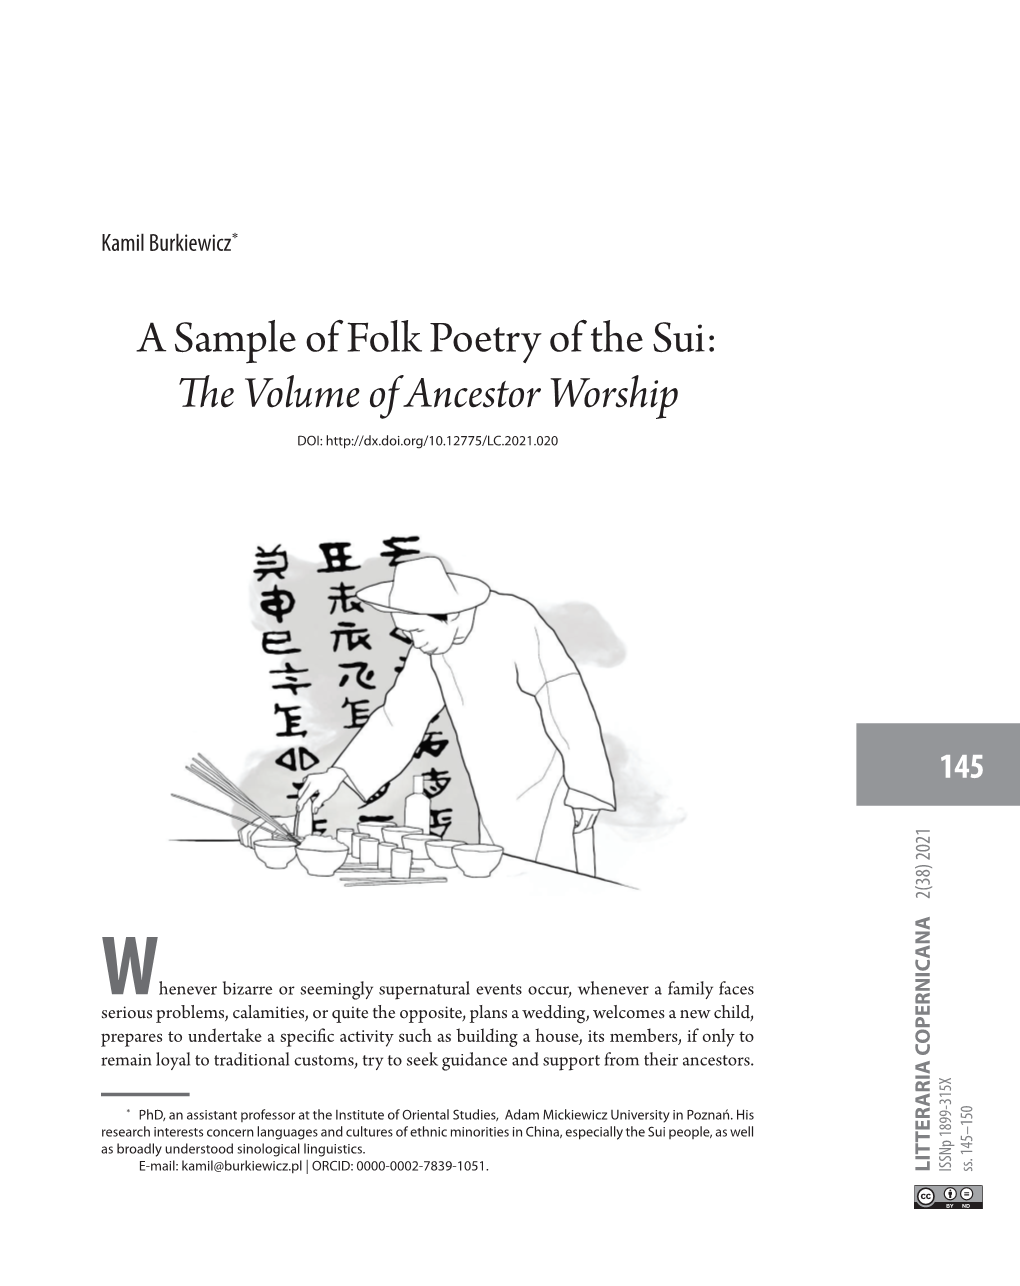 A Sample of Folk Poetry of the Sui: the Volume of Ancestor Worship